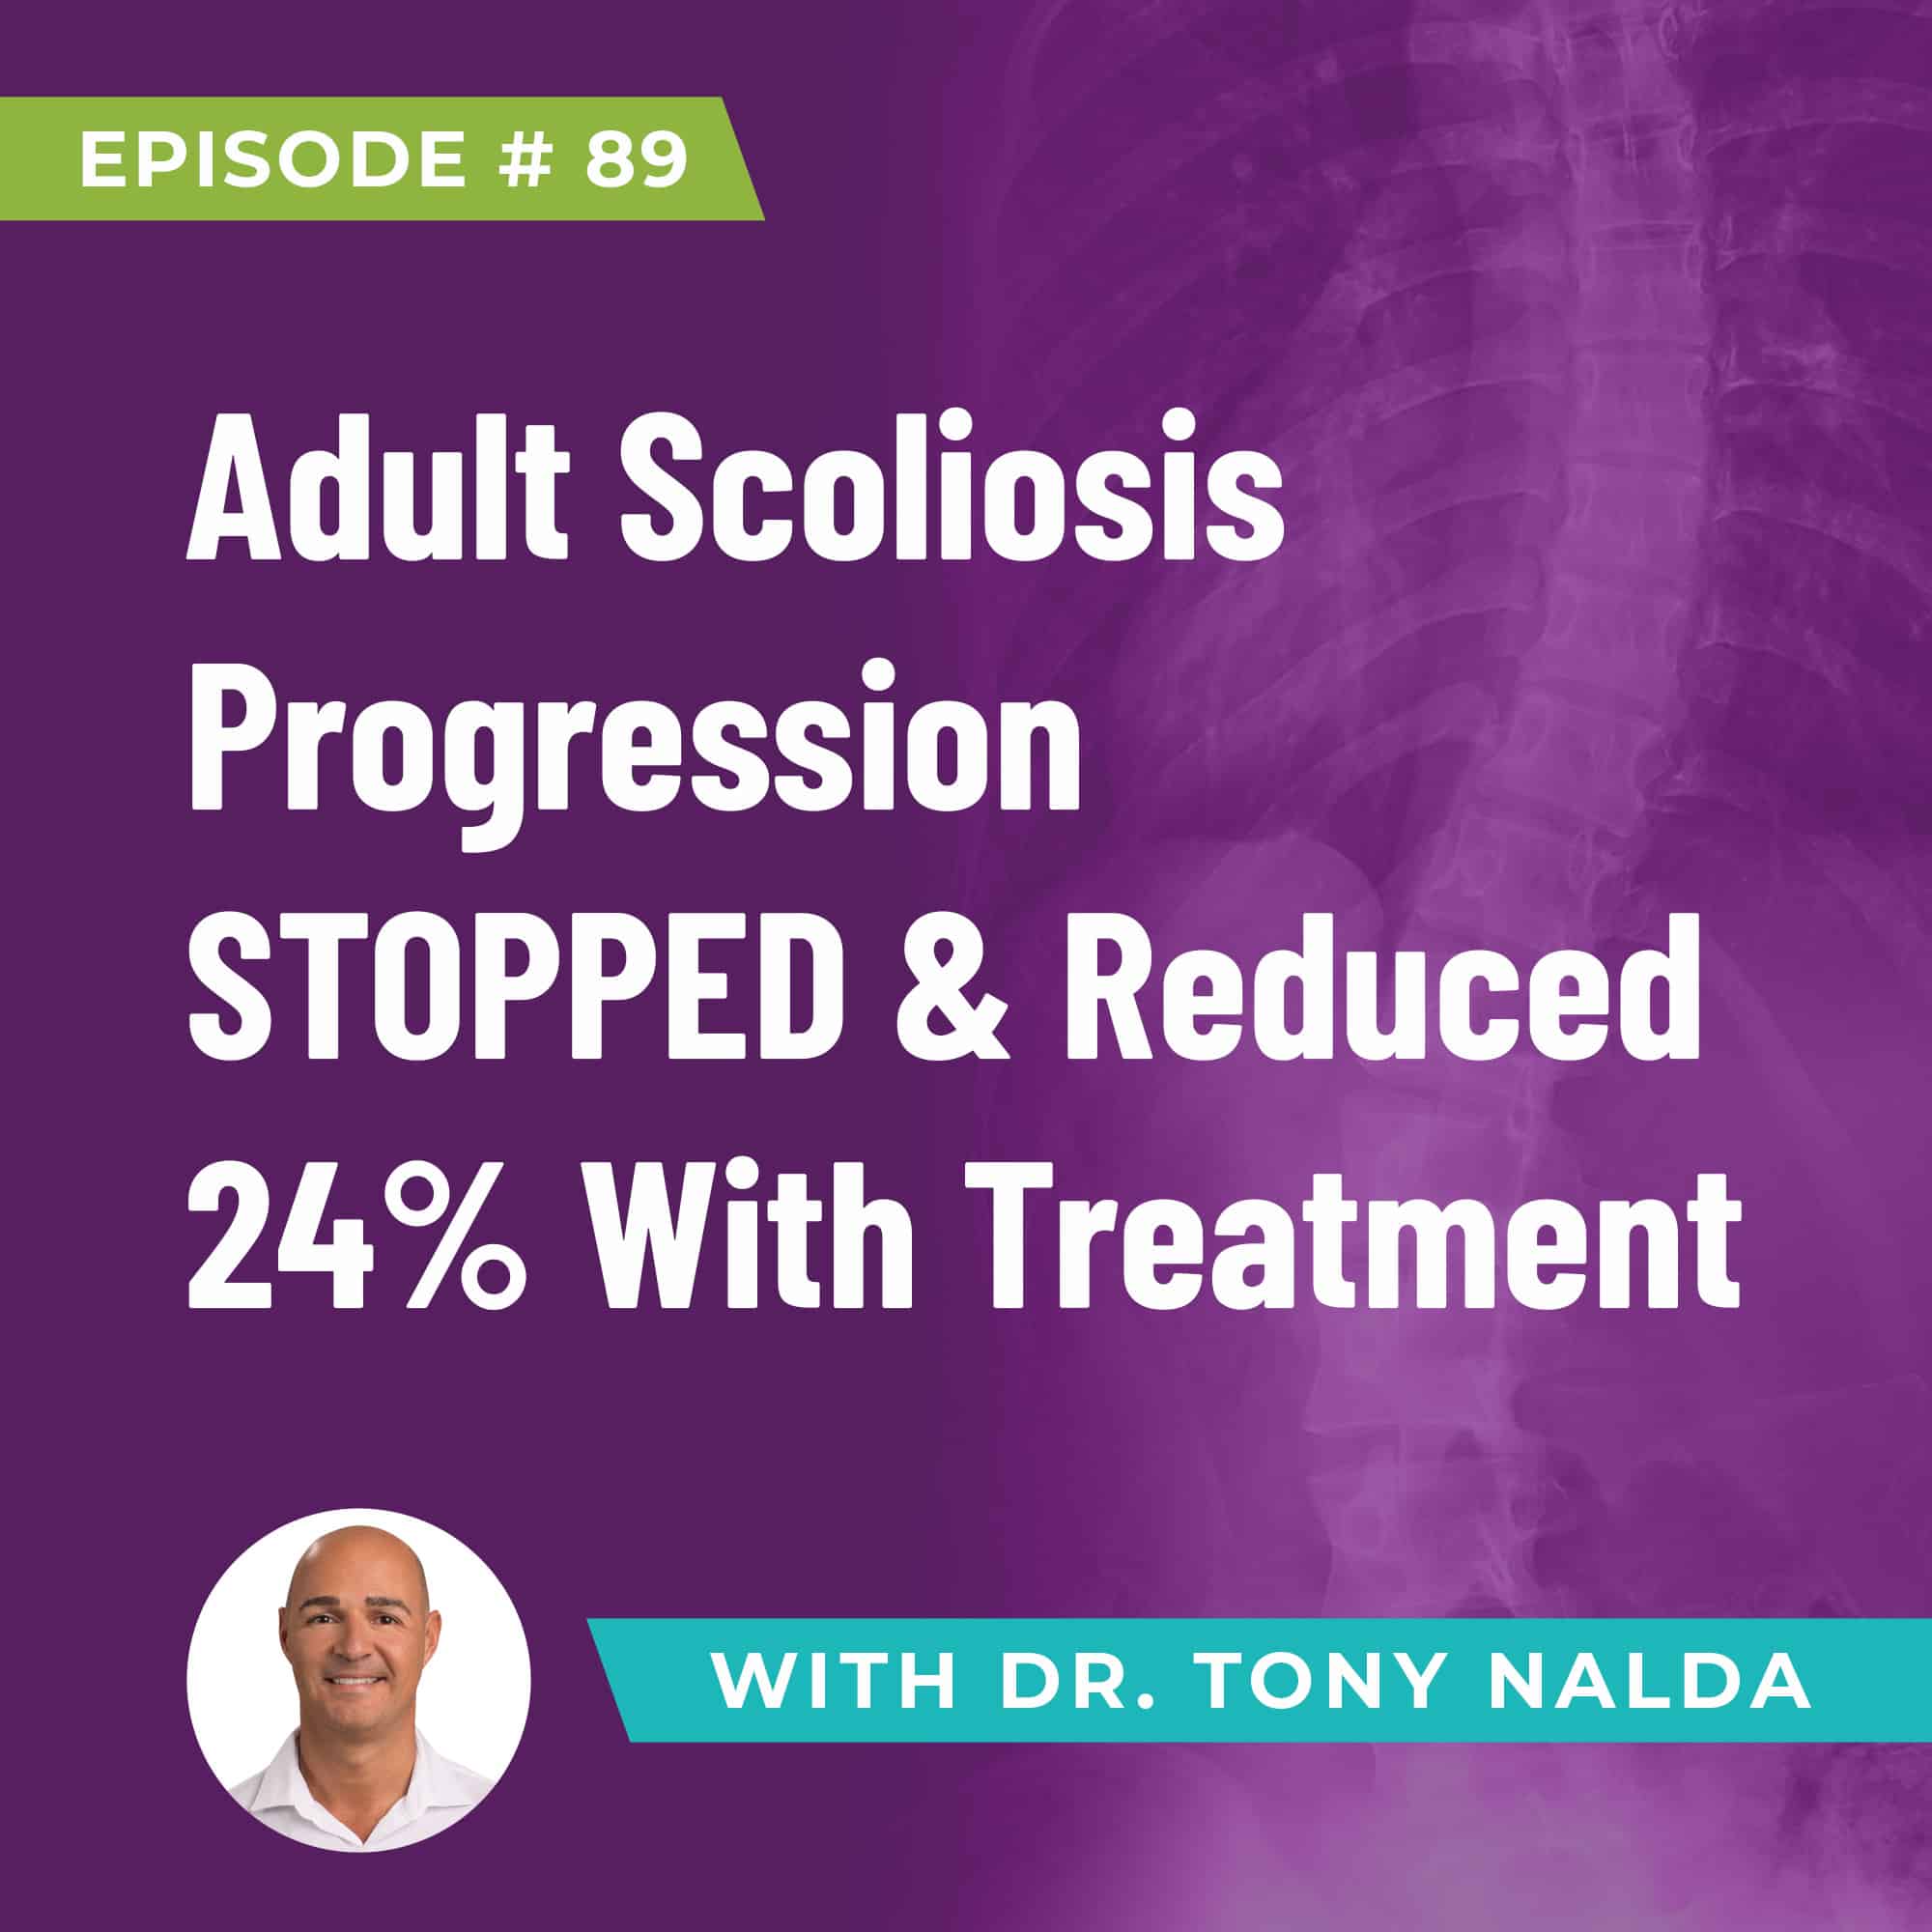 Adult Scoliosis Progression STOPPED & Reduced 24% With Treatment